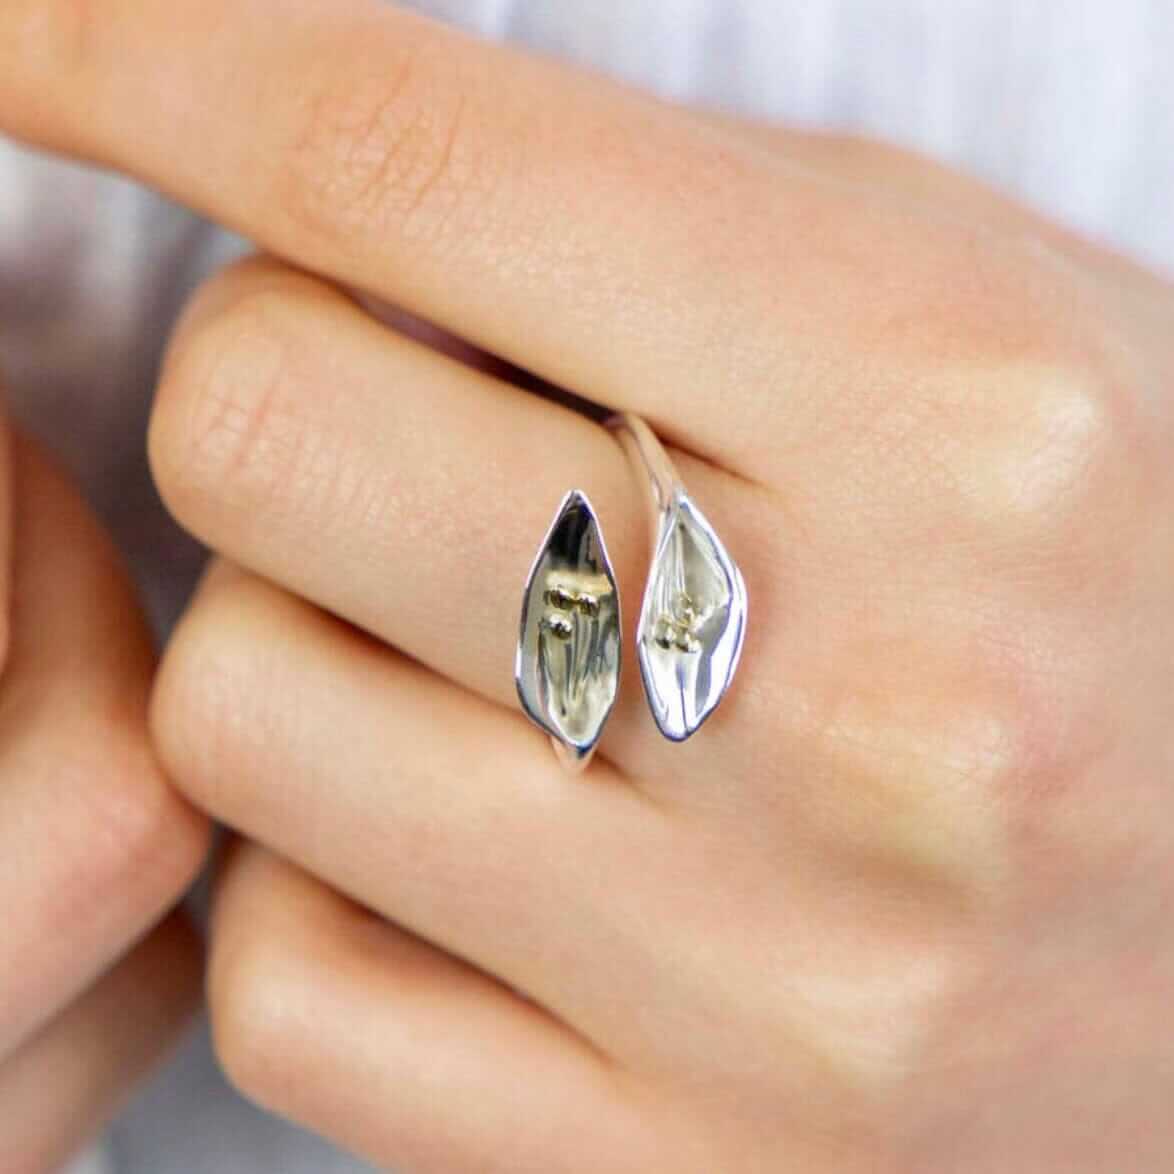 Elegant Calla Lily Ring Handmade In Sterling Silver - Twelve Silver Trees